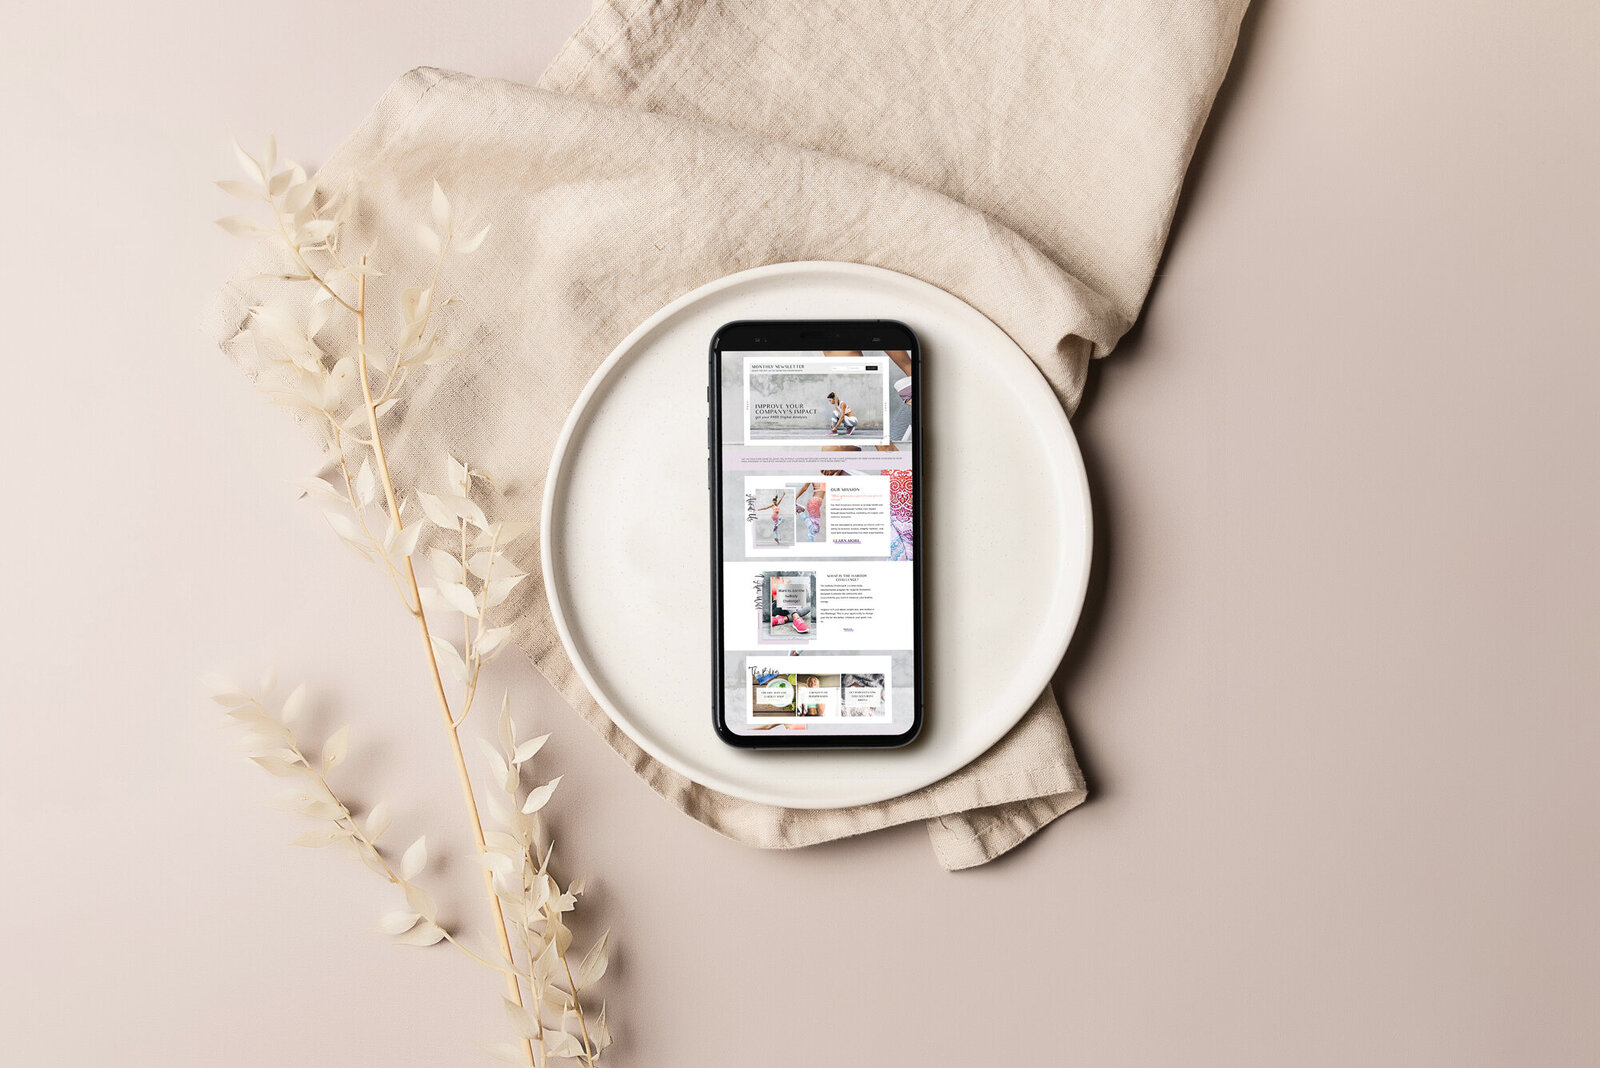 Prioritizing mobile user experience, The Agency crafts an accessible and intuitive digital space for wellness enthusiasts as shown on this smartphone.